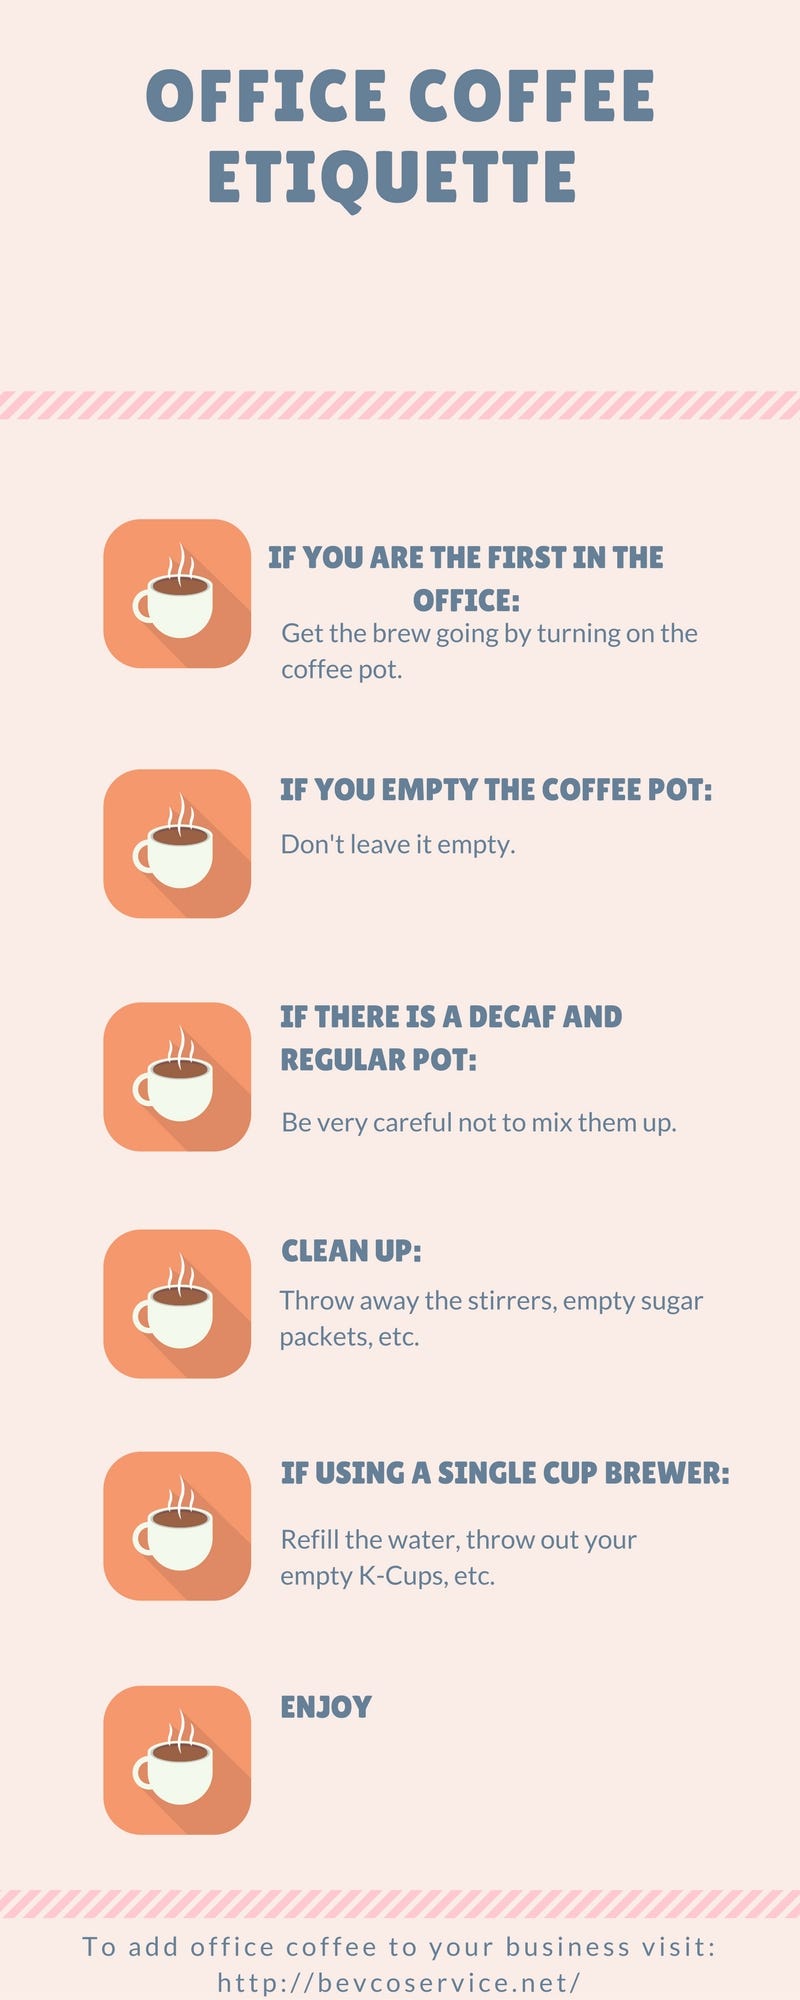 Office Coffee Etiquette | by BevCo Services | Medium